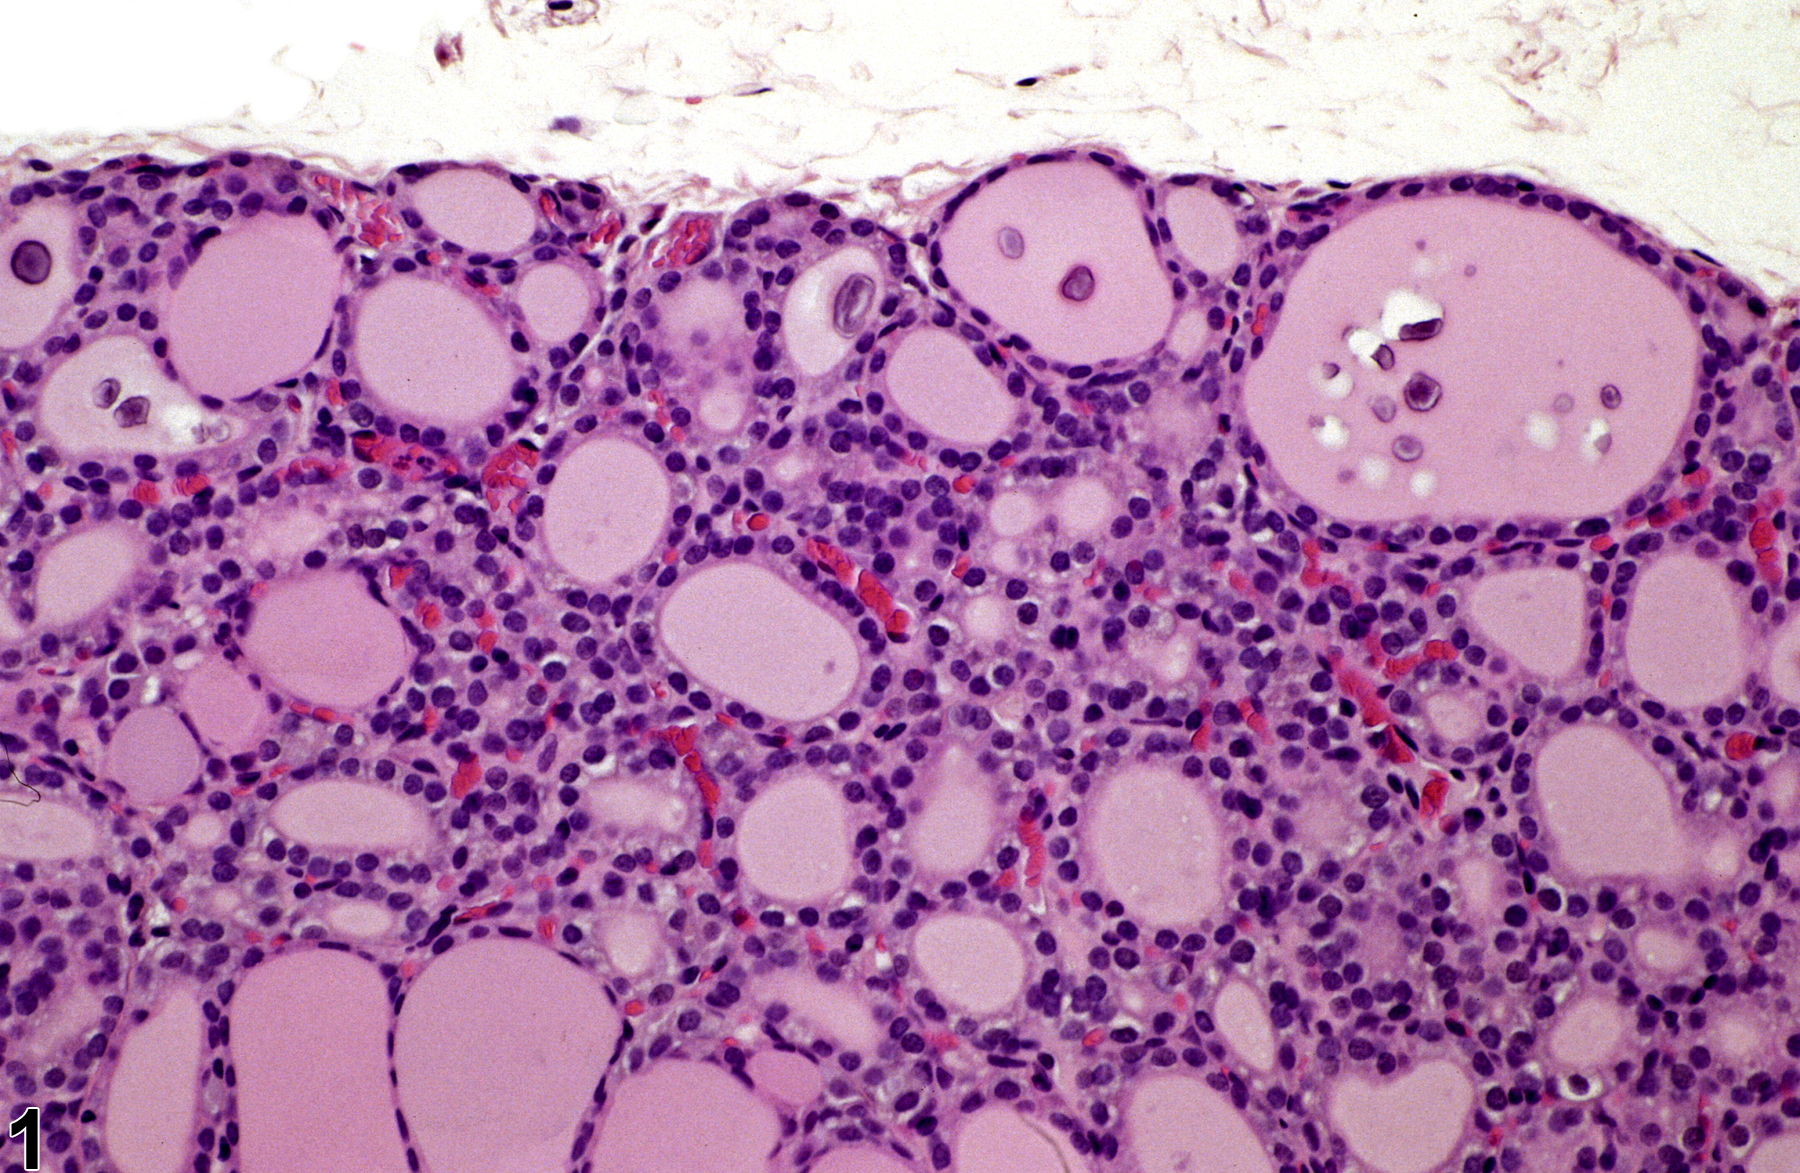 Image of follicle mineralization in the thyroid gland from a male F344/N rat in a chronic study